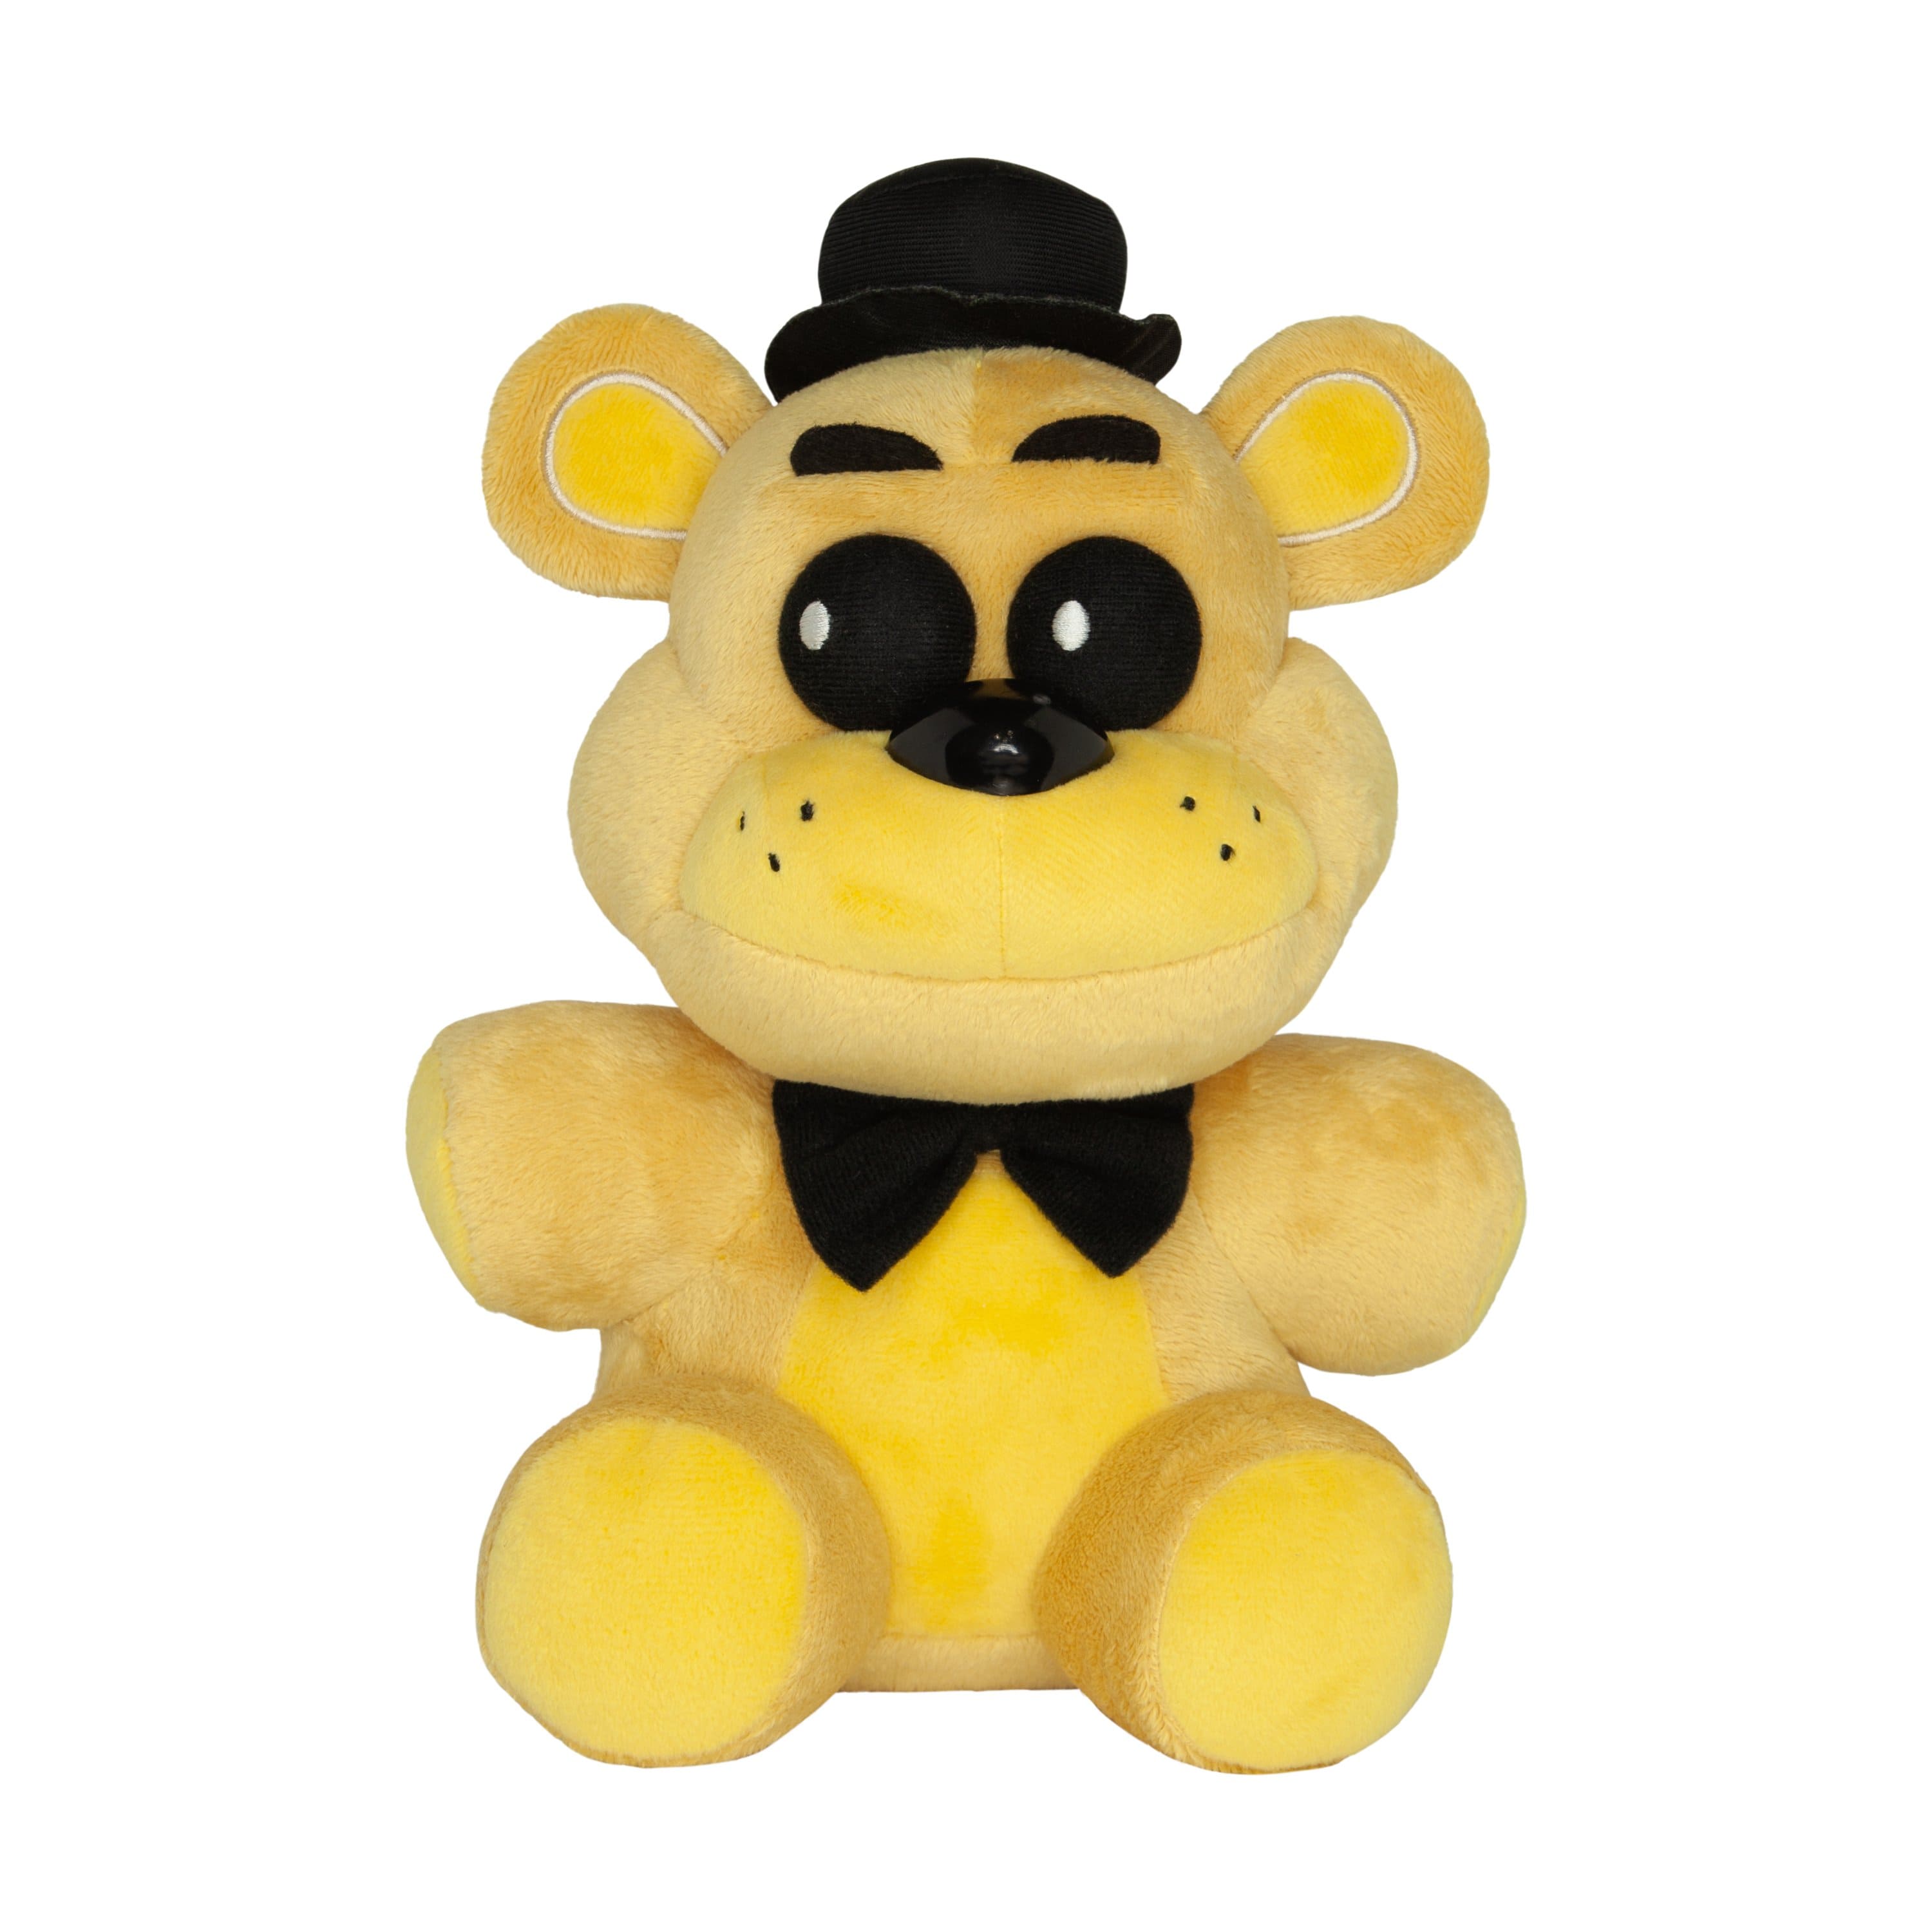 A picture of a Golden Freddy plushie.